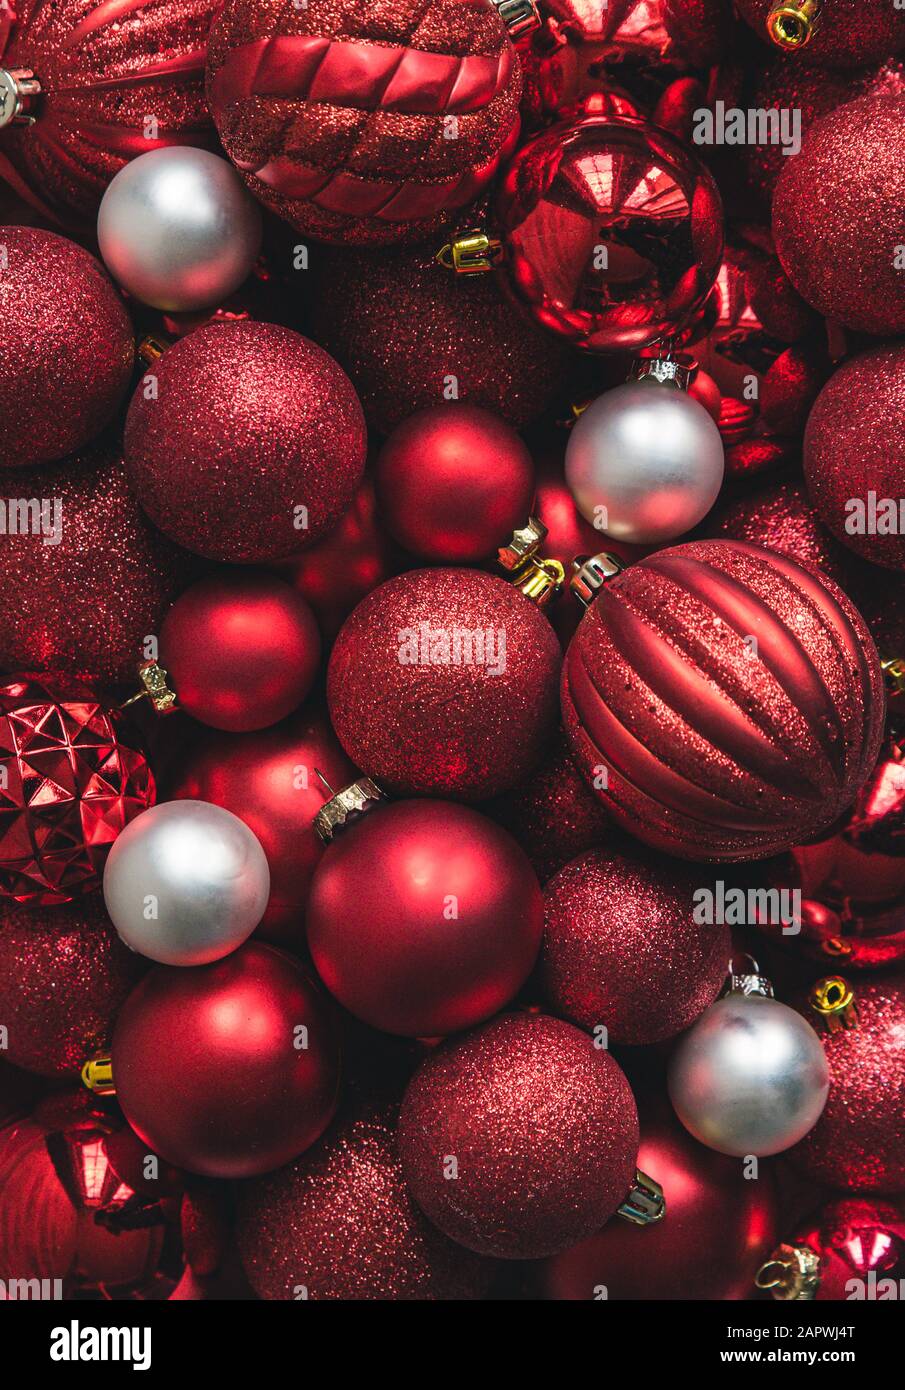 Close up of a variety of red and white christmas ball ornaments. Stock Photo